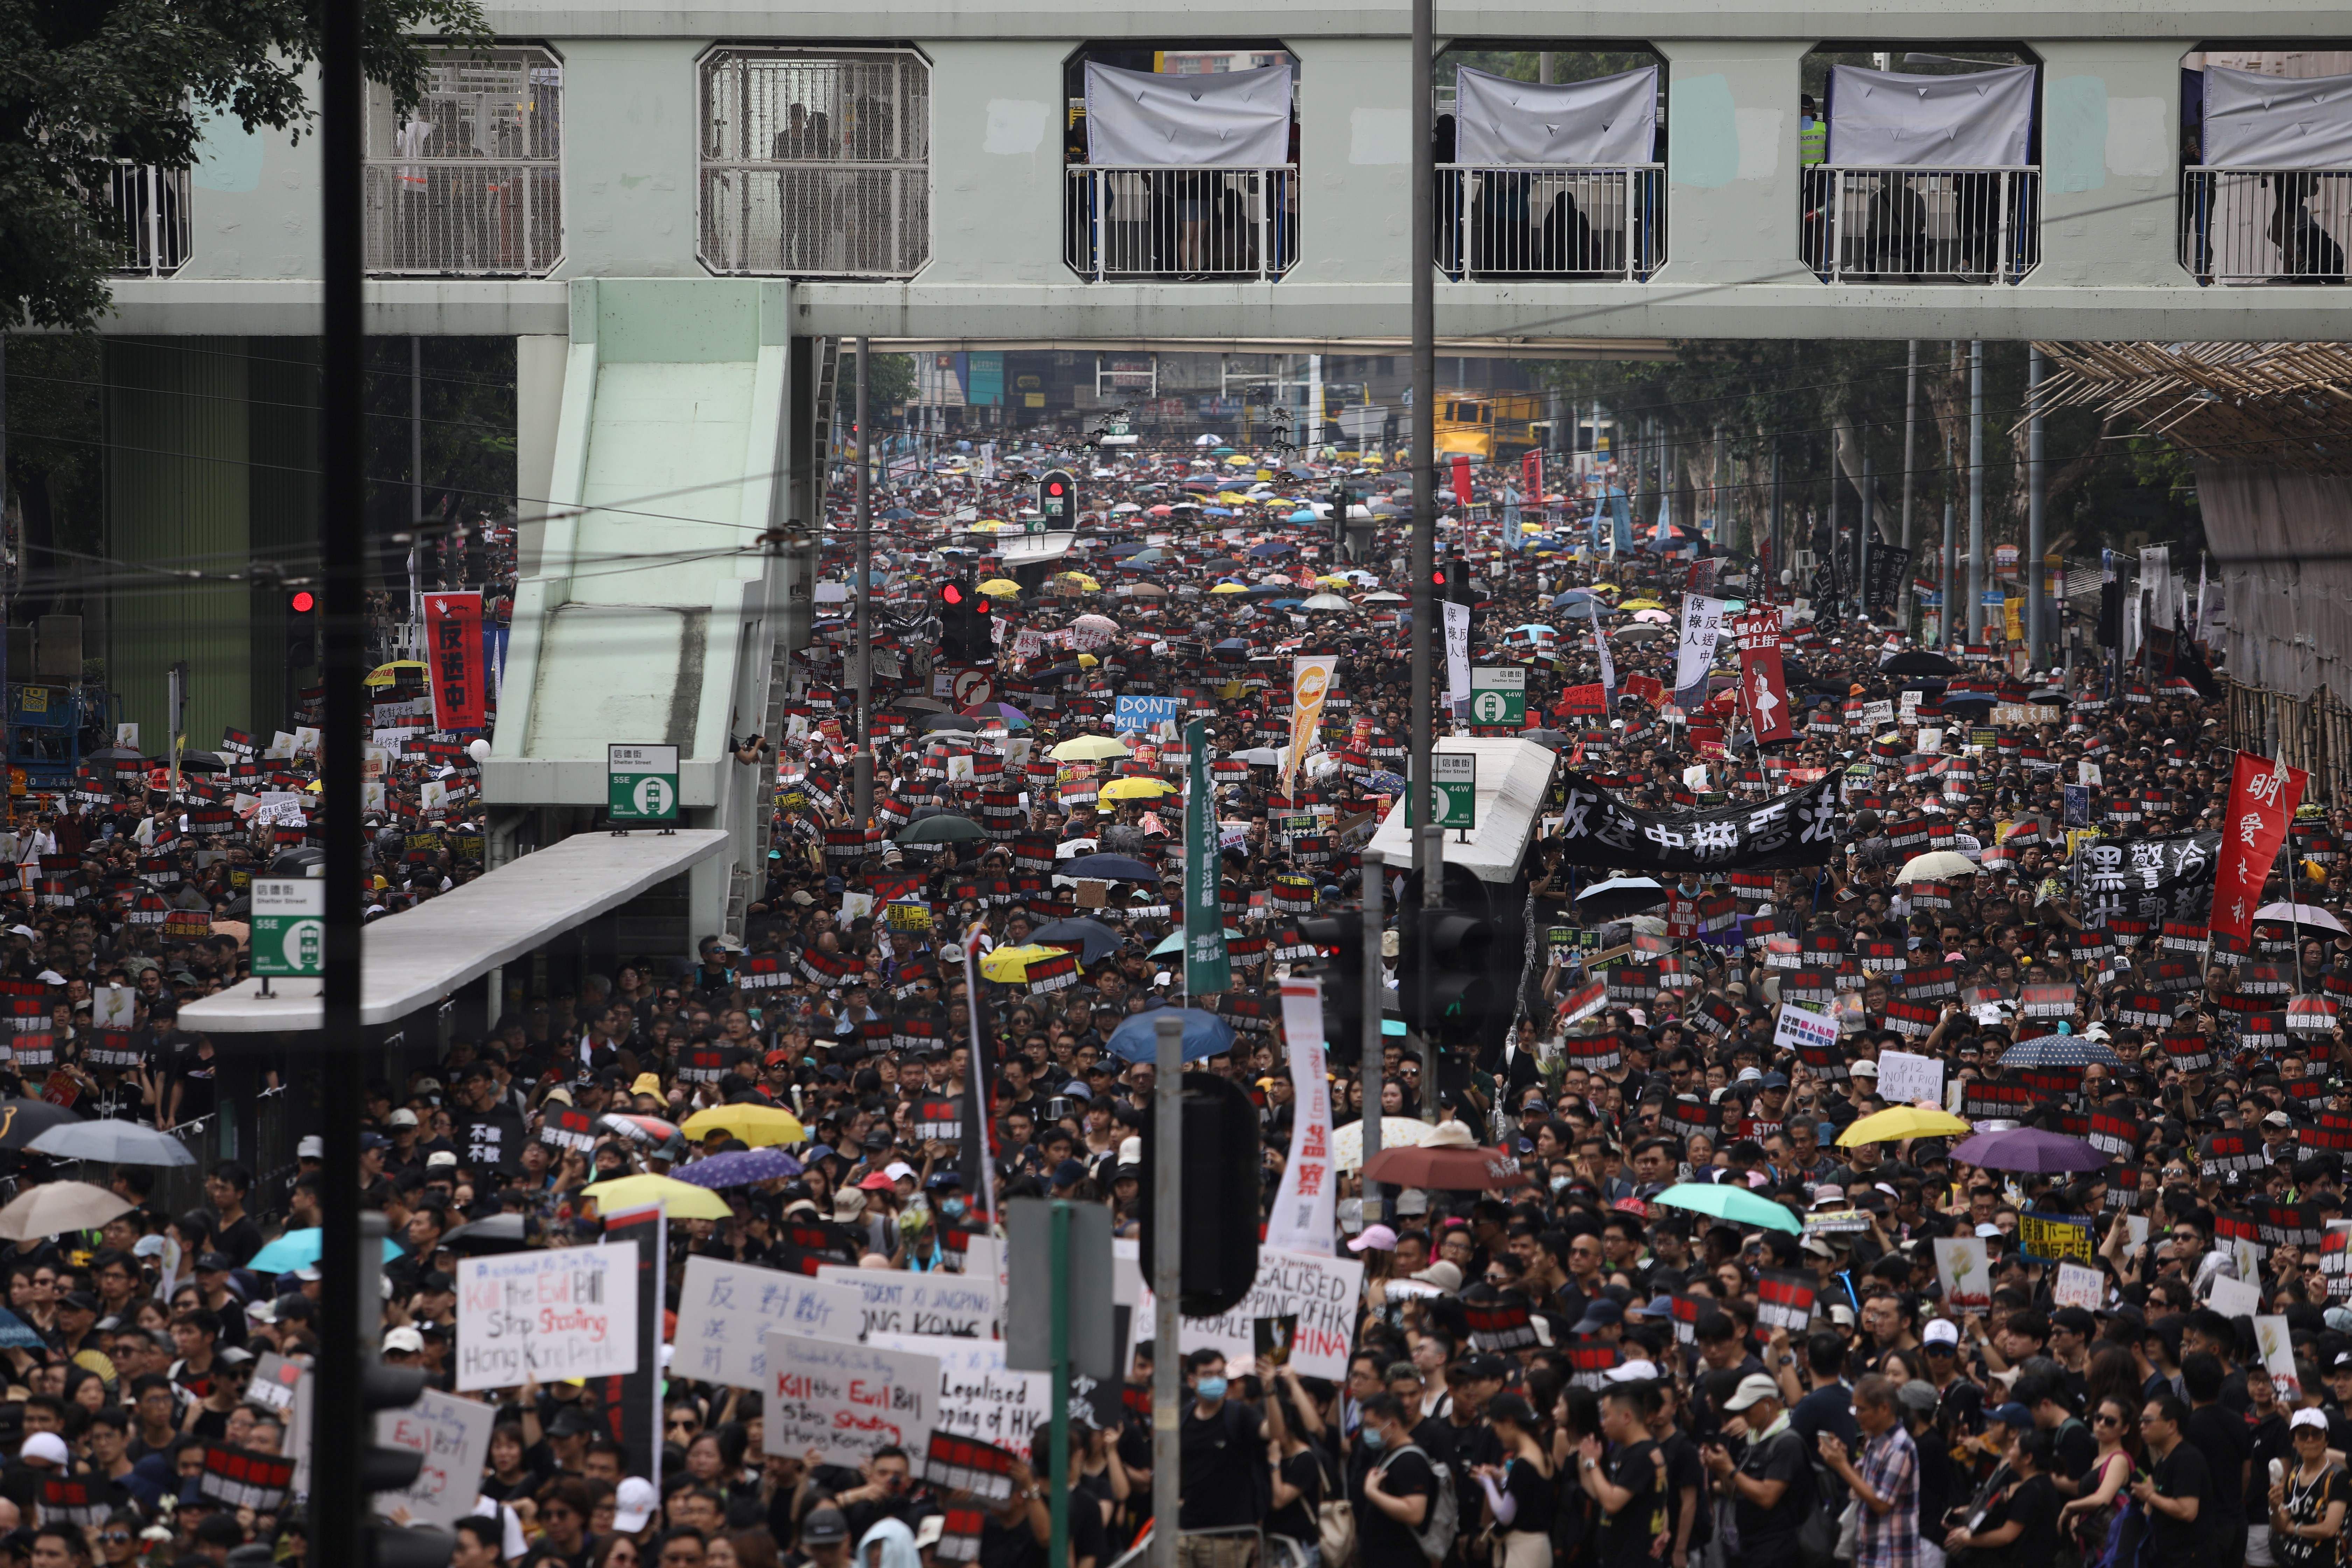  Thousands of protesters take part in a new rally against a controversial extradition law proposal in Hong Kong on June 16, 2019.